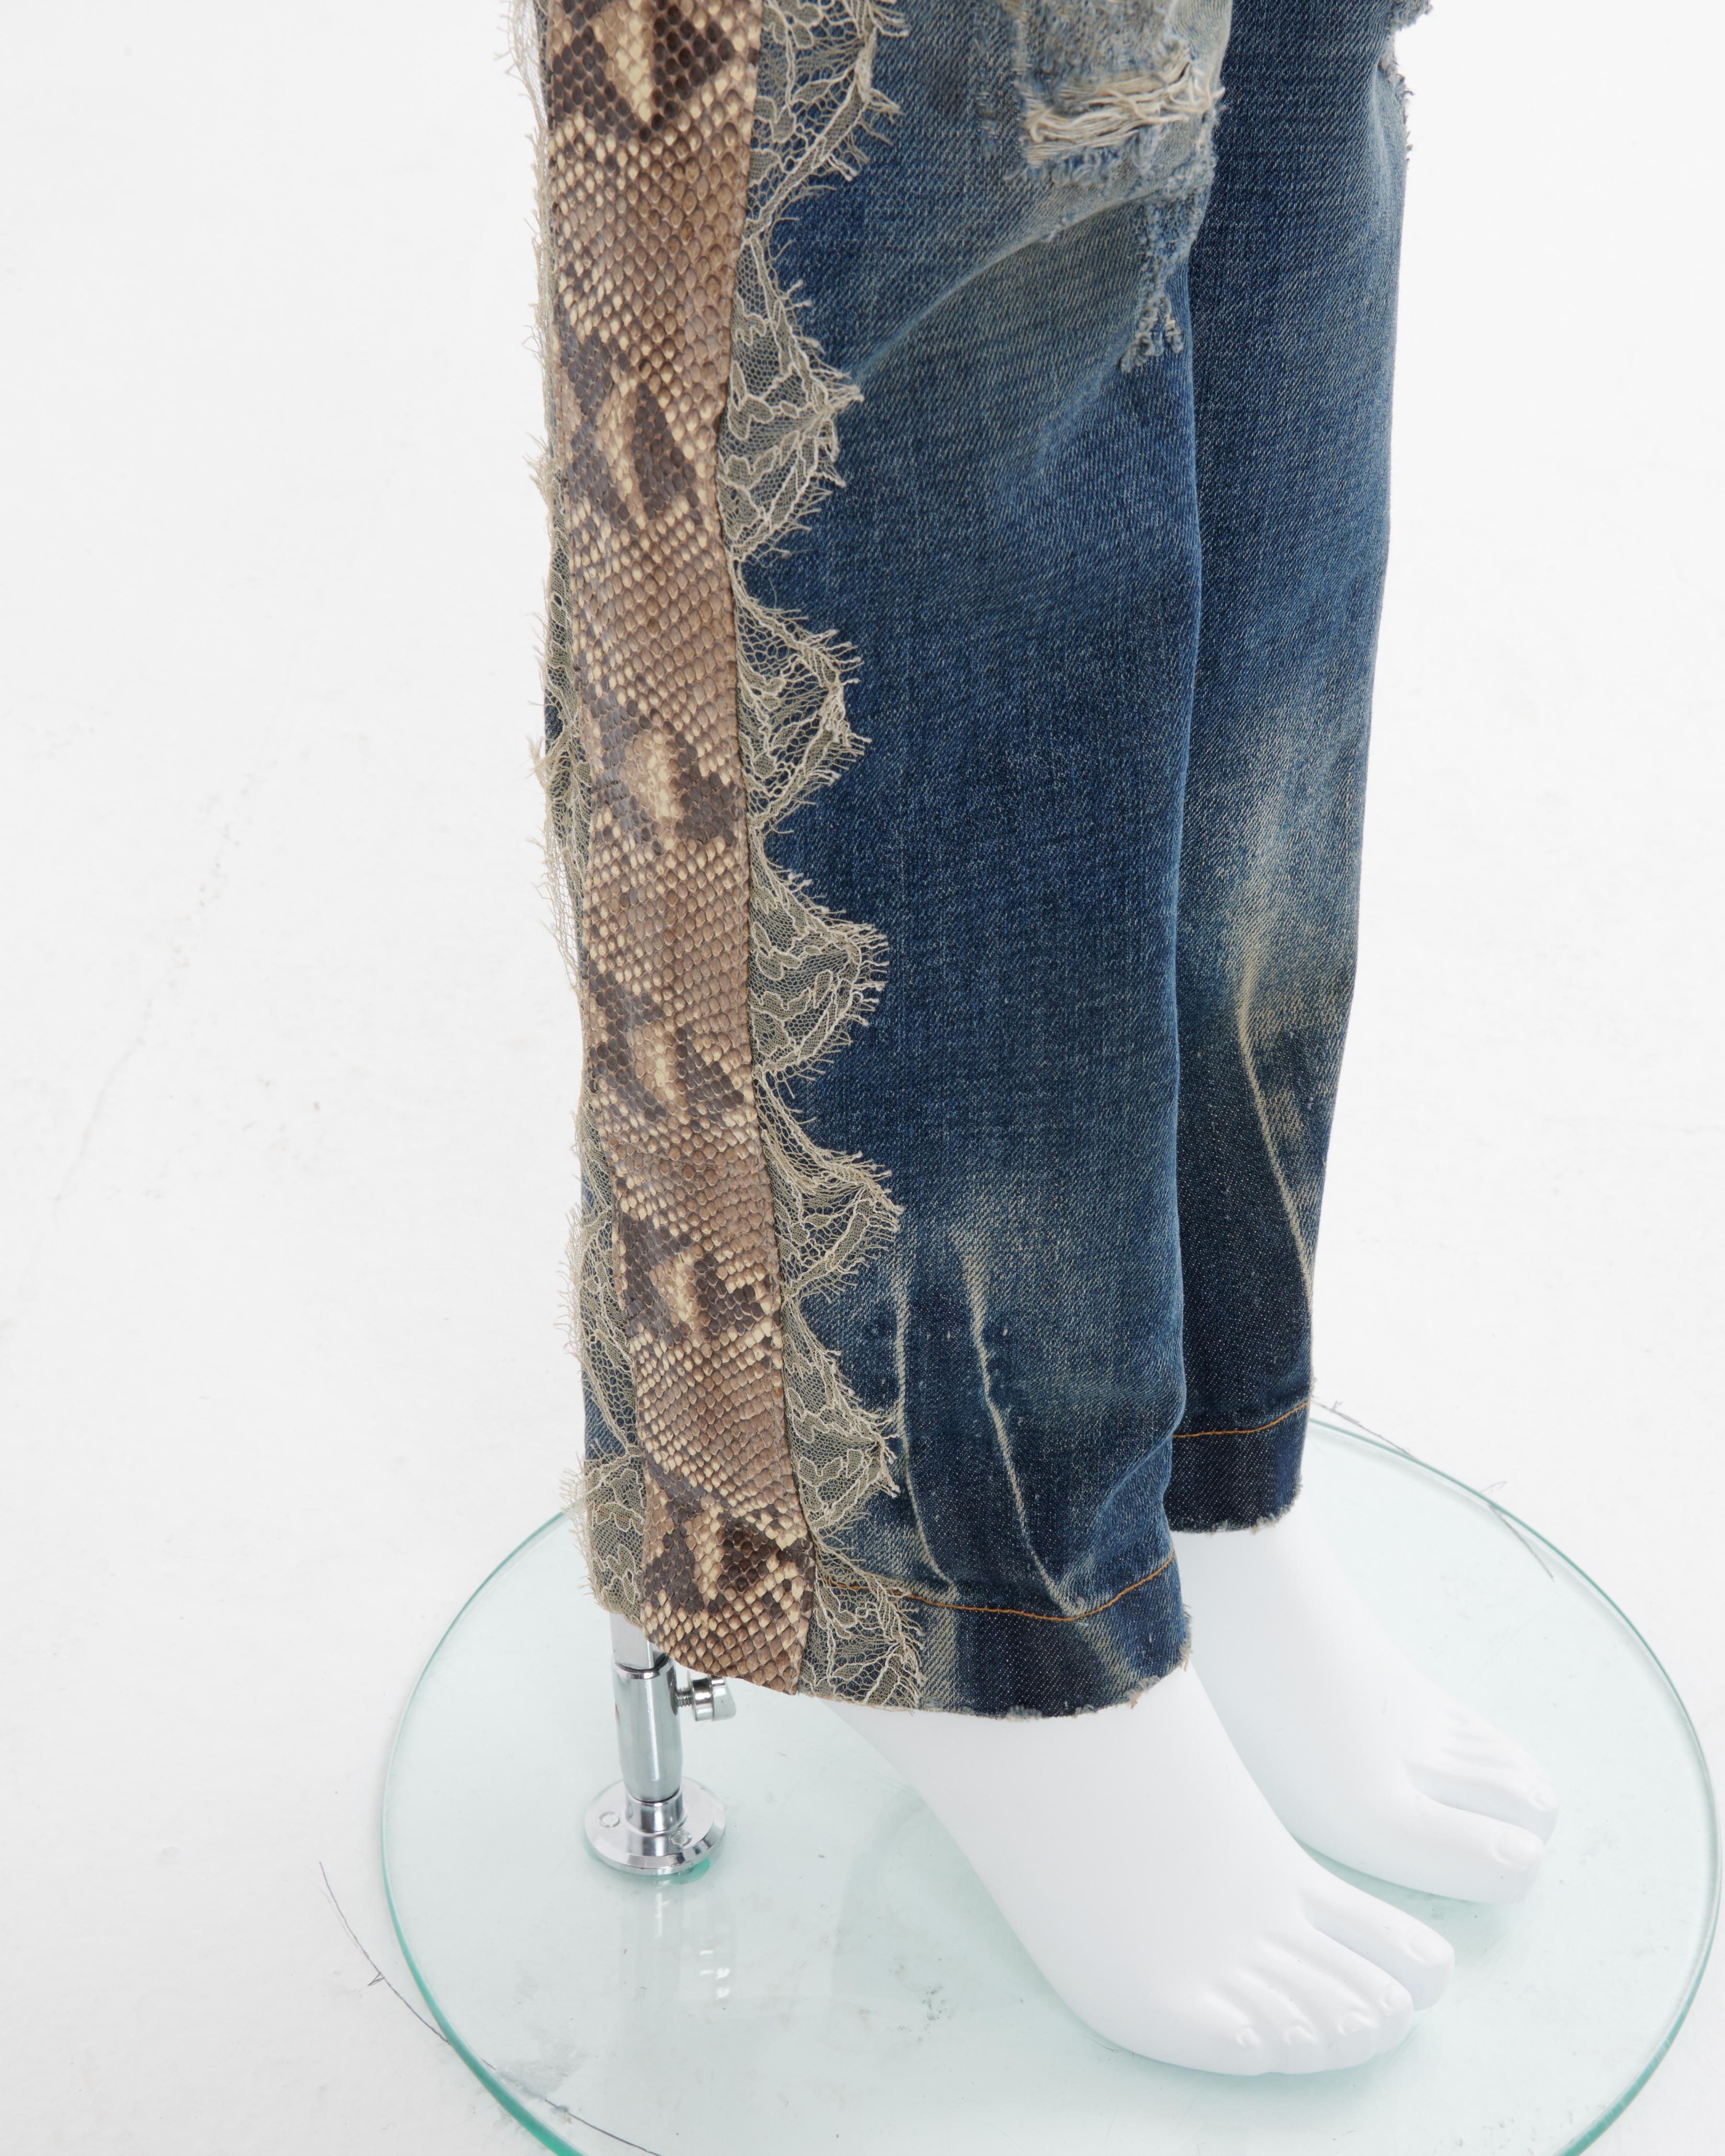 Dolce & Gabbana S/S 2005 Blue 'Dirty' washed python leather and lace denim  For Sale 3